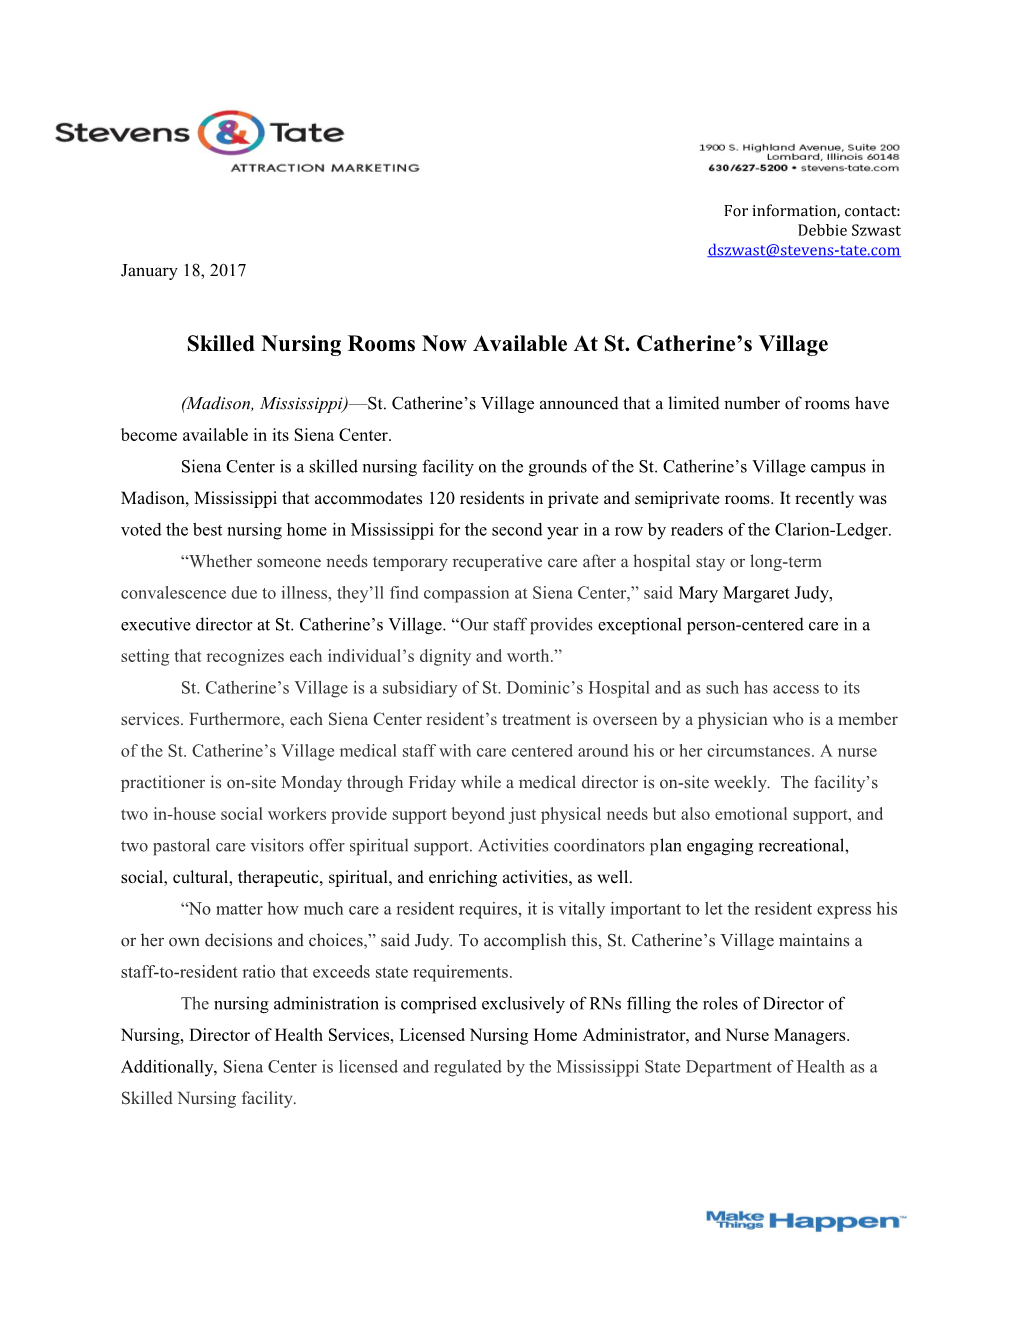 Skilled Nursing Rooms Now Available at St. Catherine S Village